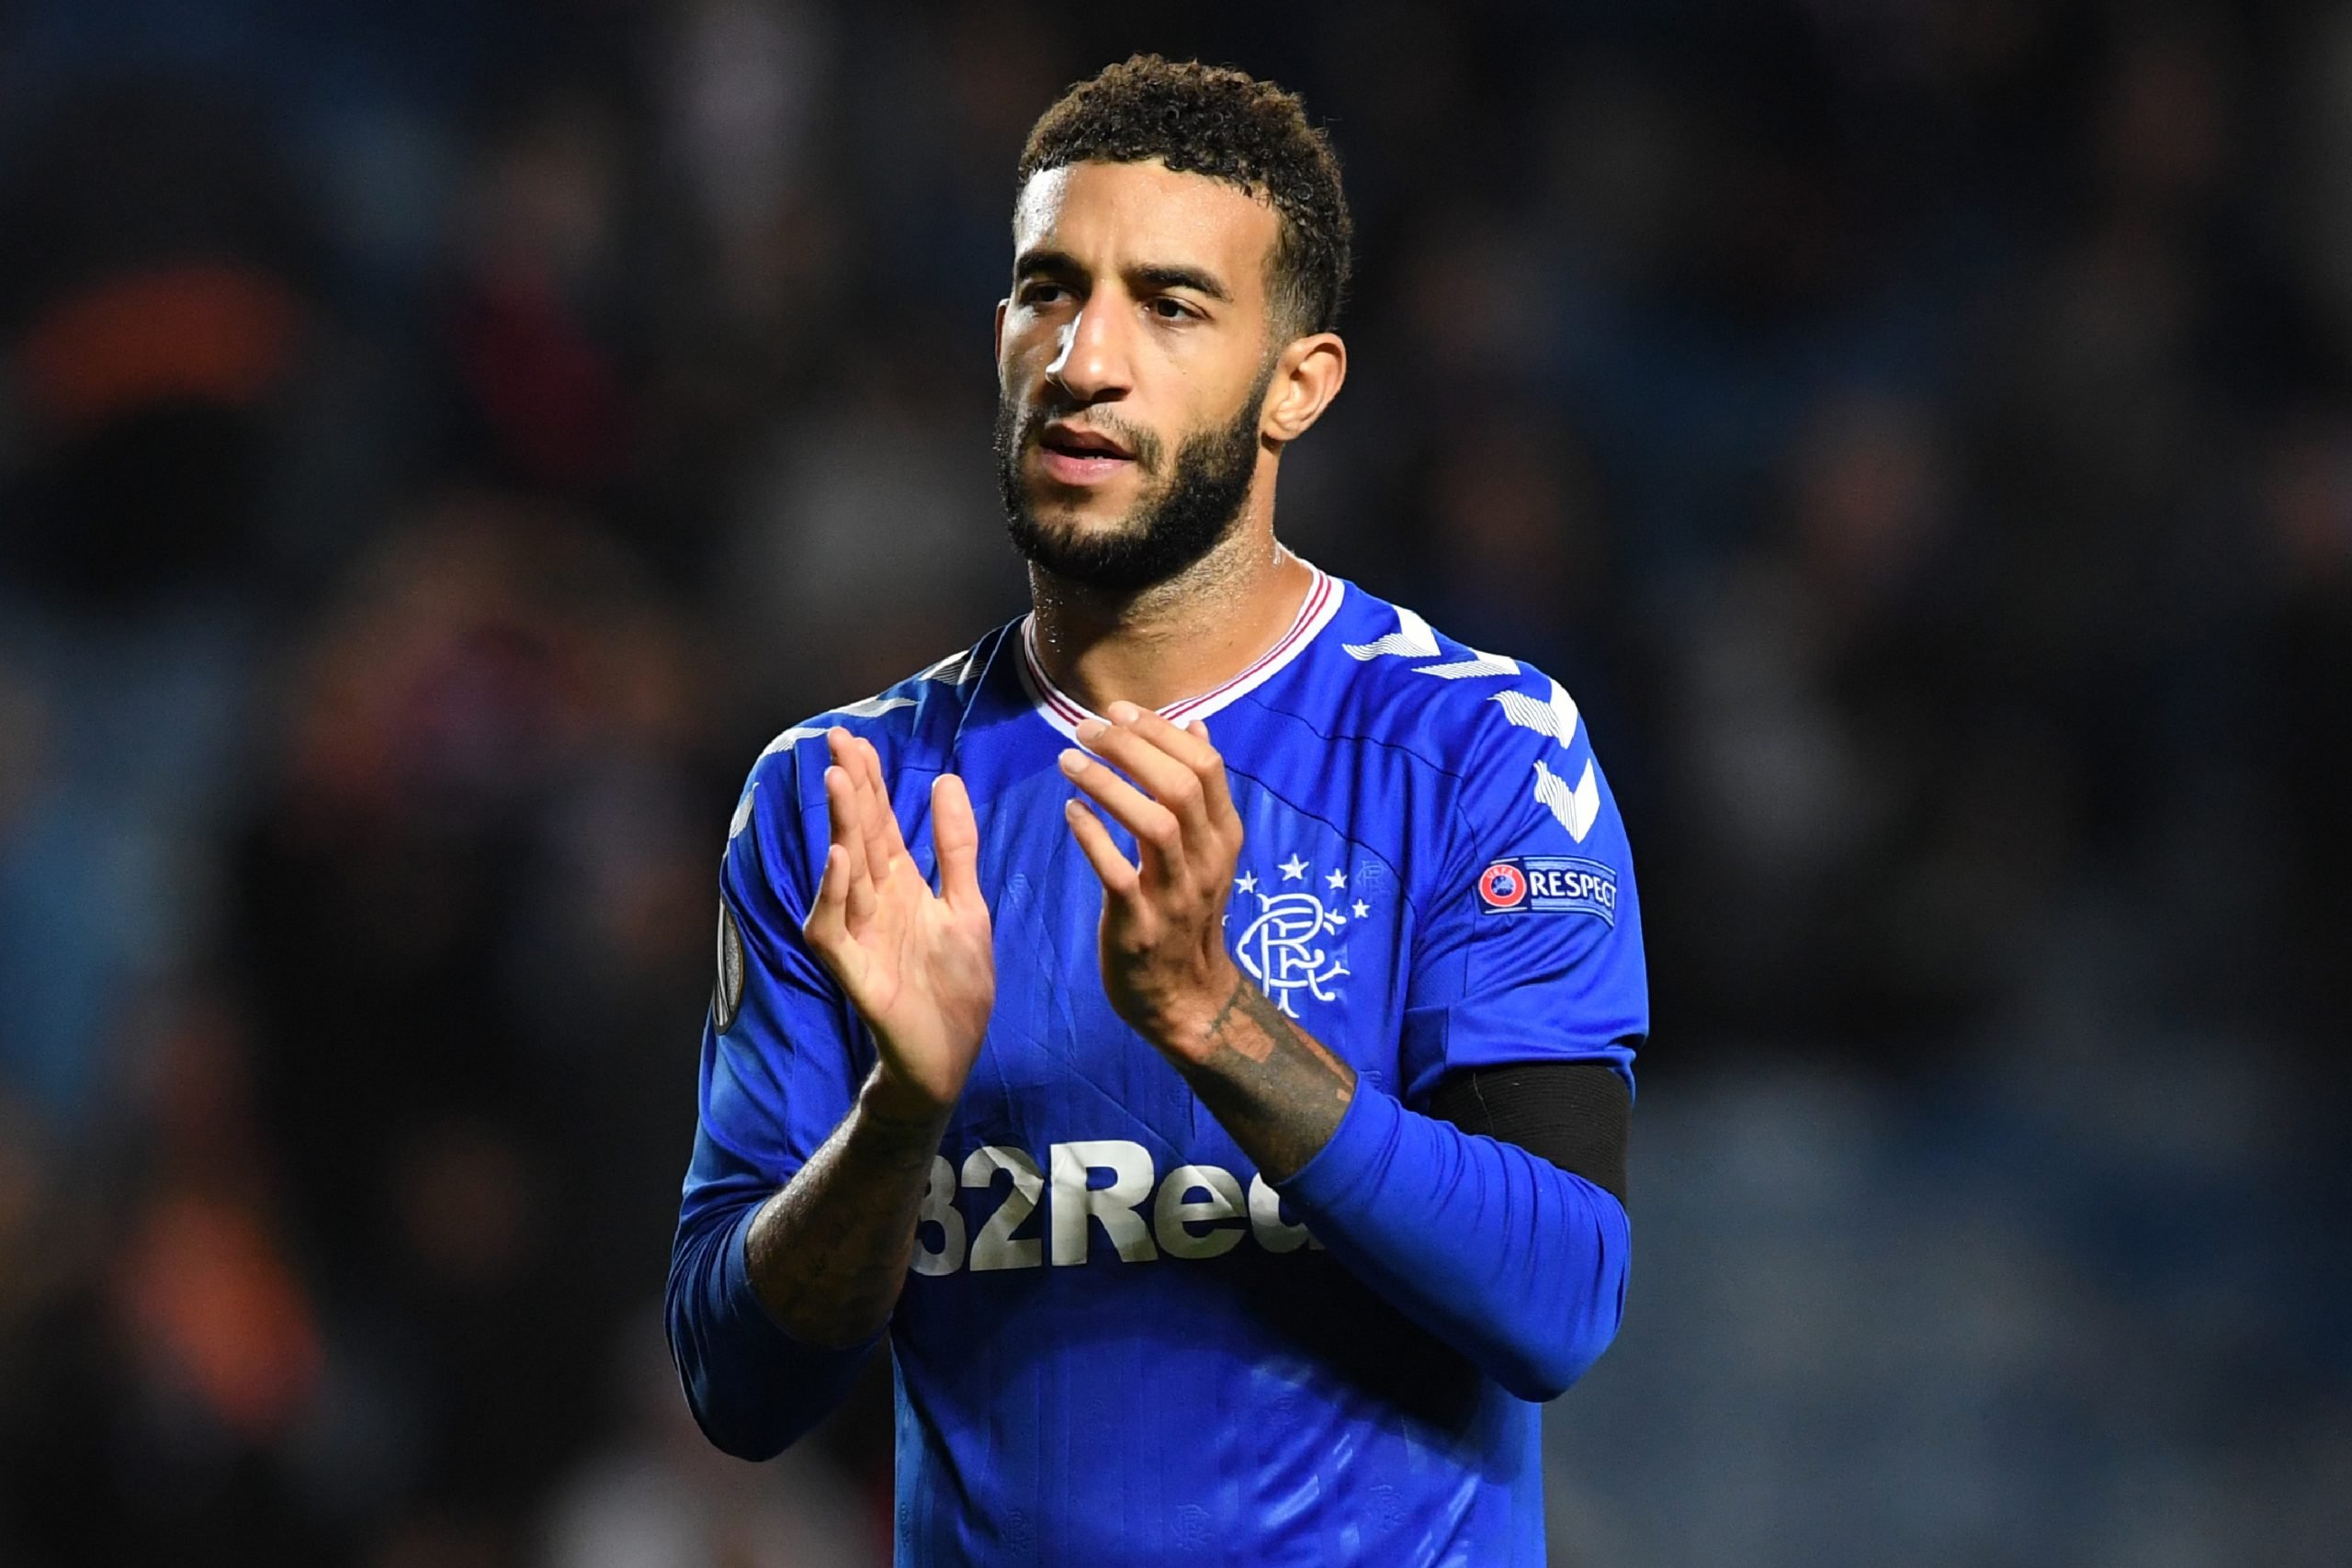 Phillips reckons Goldson, who is clapping in the picture, will be a bargain for West Ham